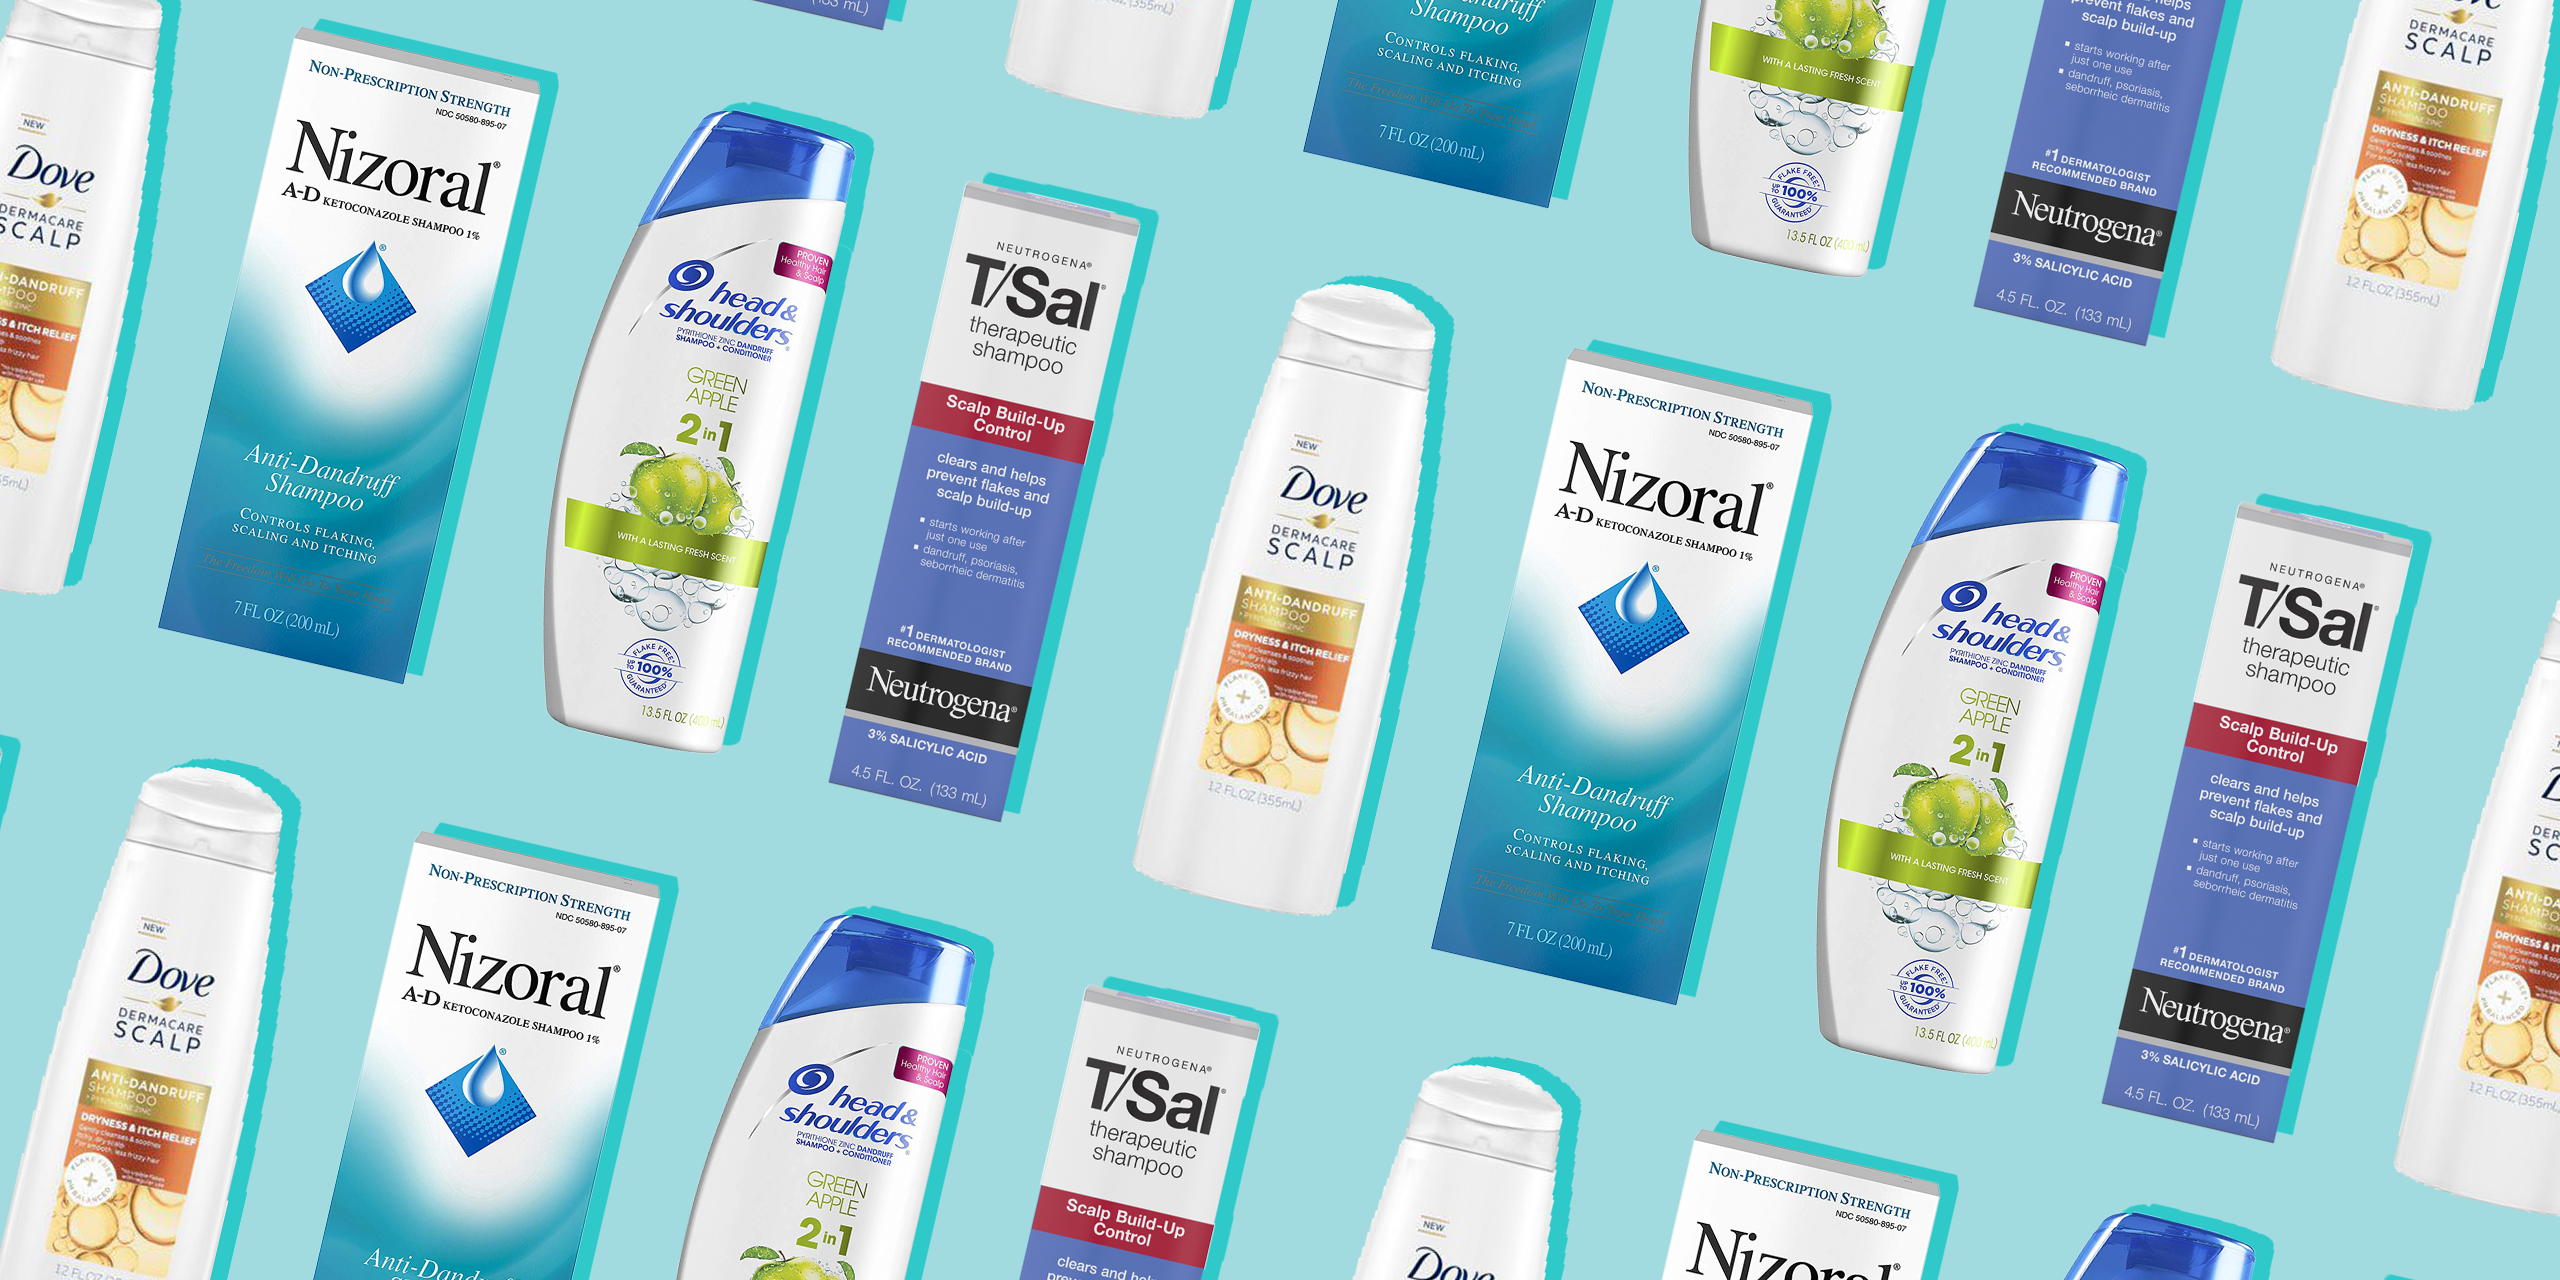 10 Best Dandruff Shampoos In 2020 According To Dermatologists